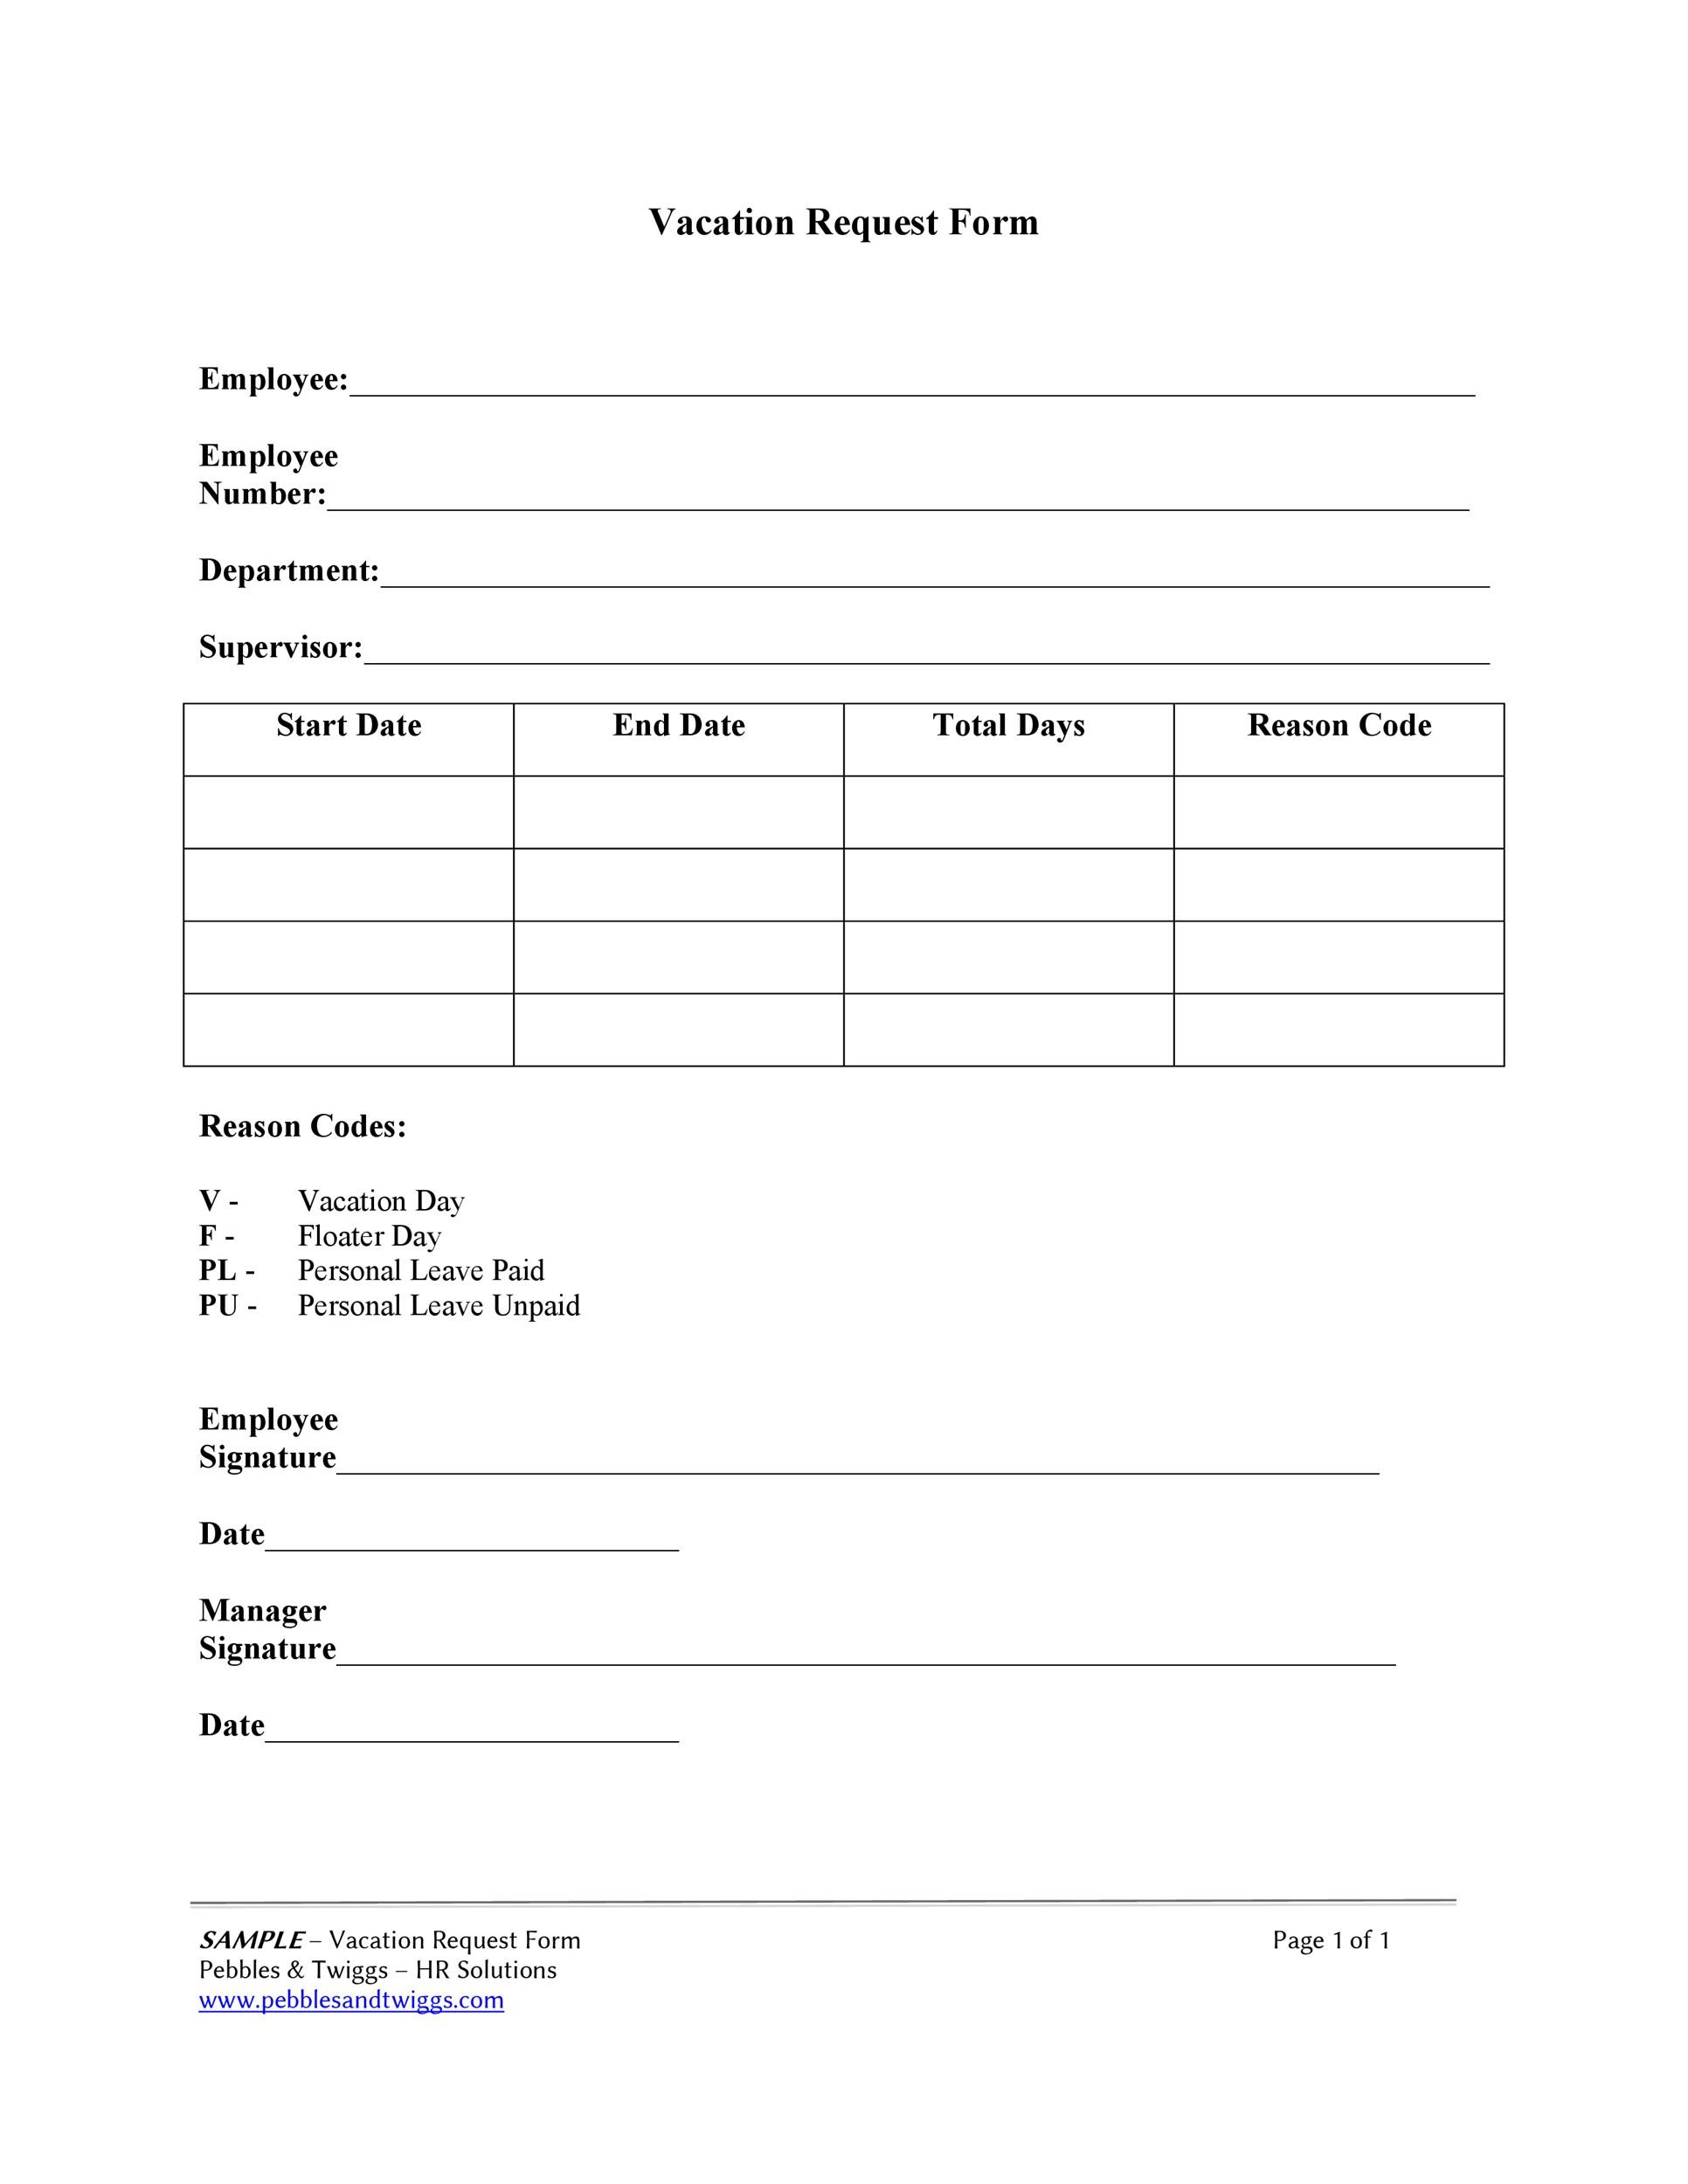 50-professional-employee-vacation-request-forms-word-templatelab